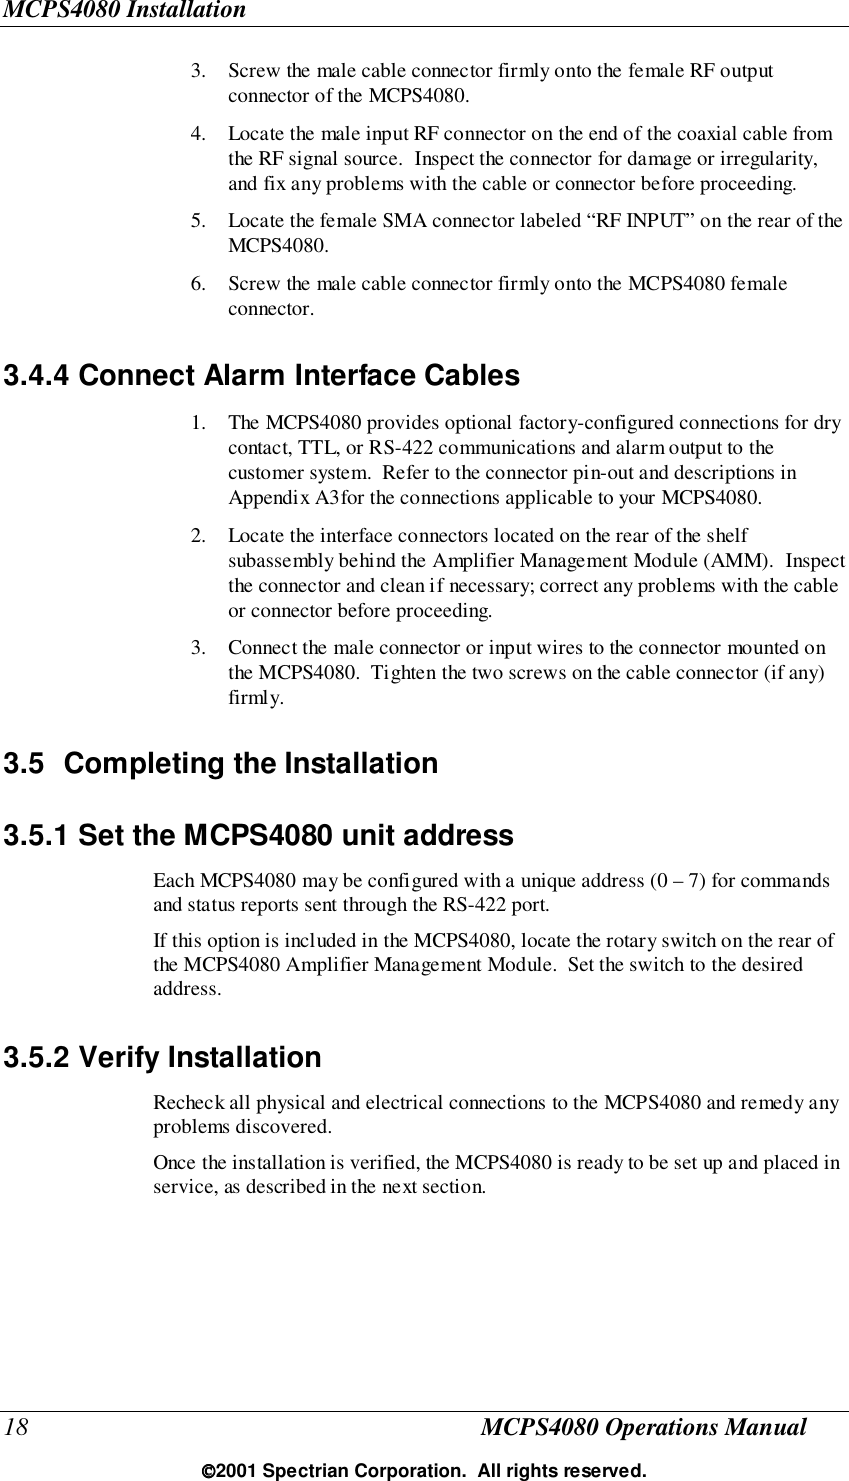 MCPS4080 Installation18 MCPS4080 Operations Manual2001 Spectrian Corporation.  All rights reserved.3. Screw the male cable connector firmly onto the female RF outputconnector of the MCPS4080.4. Locate the male input RF connector on the end of the coaxial cable fromthe RF signal source.  Inspect the connector for damage or irregularity,and fix any problems with the cable or connector before proceeding.5. Locate the female SMA connector labeled “RF INPUT” on the rear of theMCPS4080.6. Screw the male cable connector firmly onto the MCPS4080 femaleconnector.3.4.4 Connect Alarm Interface Cables1. The MCPS4080 provides optional factory-configured connections for drycontact, TTL, or RS-422 communications and alarm output to thecustomer system.  Refer to the connector pin-out and descriptions inAppendix A3for the connections applicable to your MCPS4080.2. Locate the interface connectors located on the rear of the shelfsubassembly behind the Amplifier Management Module (AMM).  Inspectthe connector and clean if necessary; correct any problems with the cableor connector before proceeding.3. Connect the male connector or input wires to the connector mounted onthe MCPS4080.  Tighten the two screws on the cable connector (if any)firmly.3.5 Completing the Installation3.5.1 Set the MCPS4080 unit addressEach MCPS4080 may be configured with a unique address (0 – 7) for commandsand status reports sent through the RS-422 port.If this option is included in the MCPS4080, locate the rotary switch on the rear ofthe MCPS4080 Amplifier Management Module.  Set the switch to the desiredaddress.3.5.2 Verify InstallationRecheck all physical and electrical connections to the MCPS4080 and remedy anyproblems discovered.Once the installation is verified, the MCPS4080 is ready to be set up and placed inservice, as described in the next section.